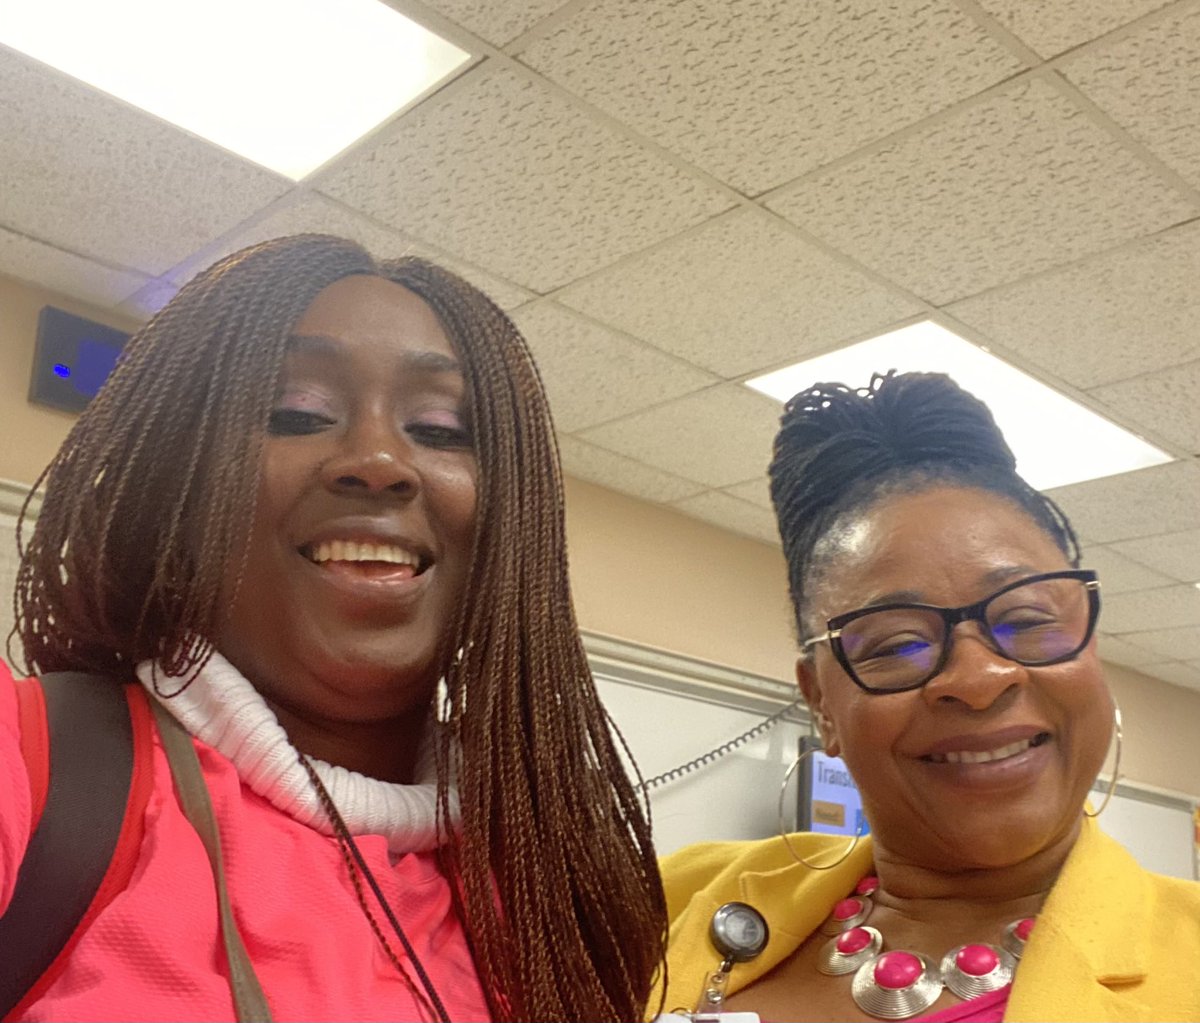 Neon ladies! So excited that we are impacting on our students. ⁦@TeagueMS_AISD⁩ ⁦@gwschattle281⁩ ⁦@ACormierRuss⁩ #TrojanForward #AldineConnected #AldineConectado